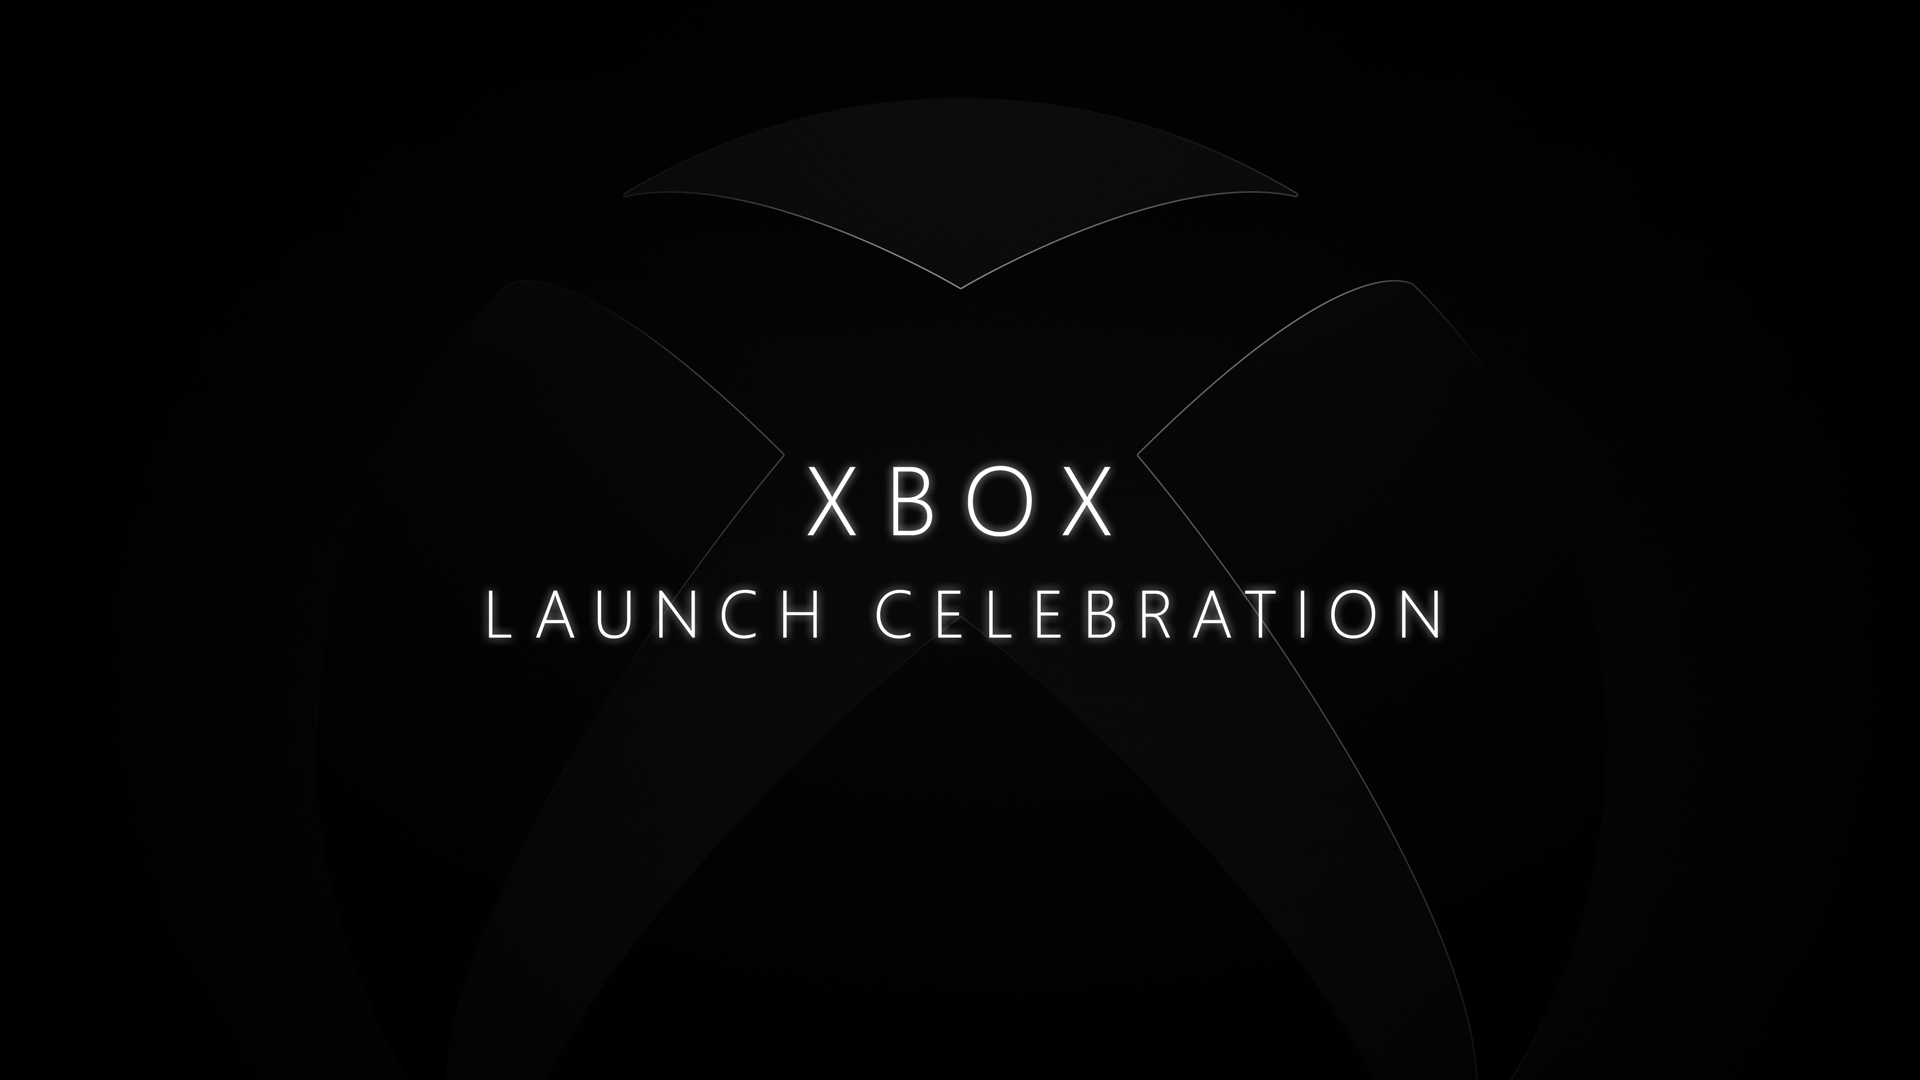 Kicking off a New Generation of Play, Together - Xbox Wire